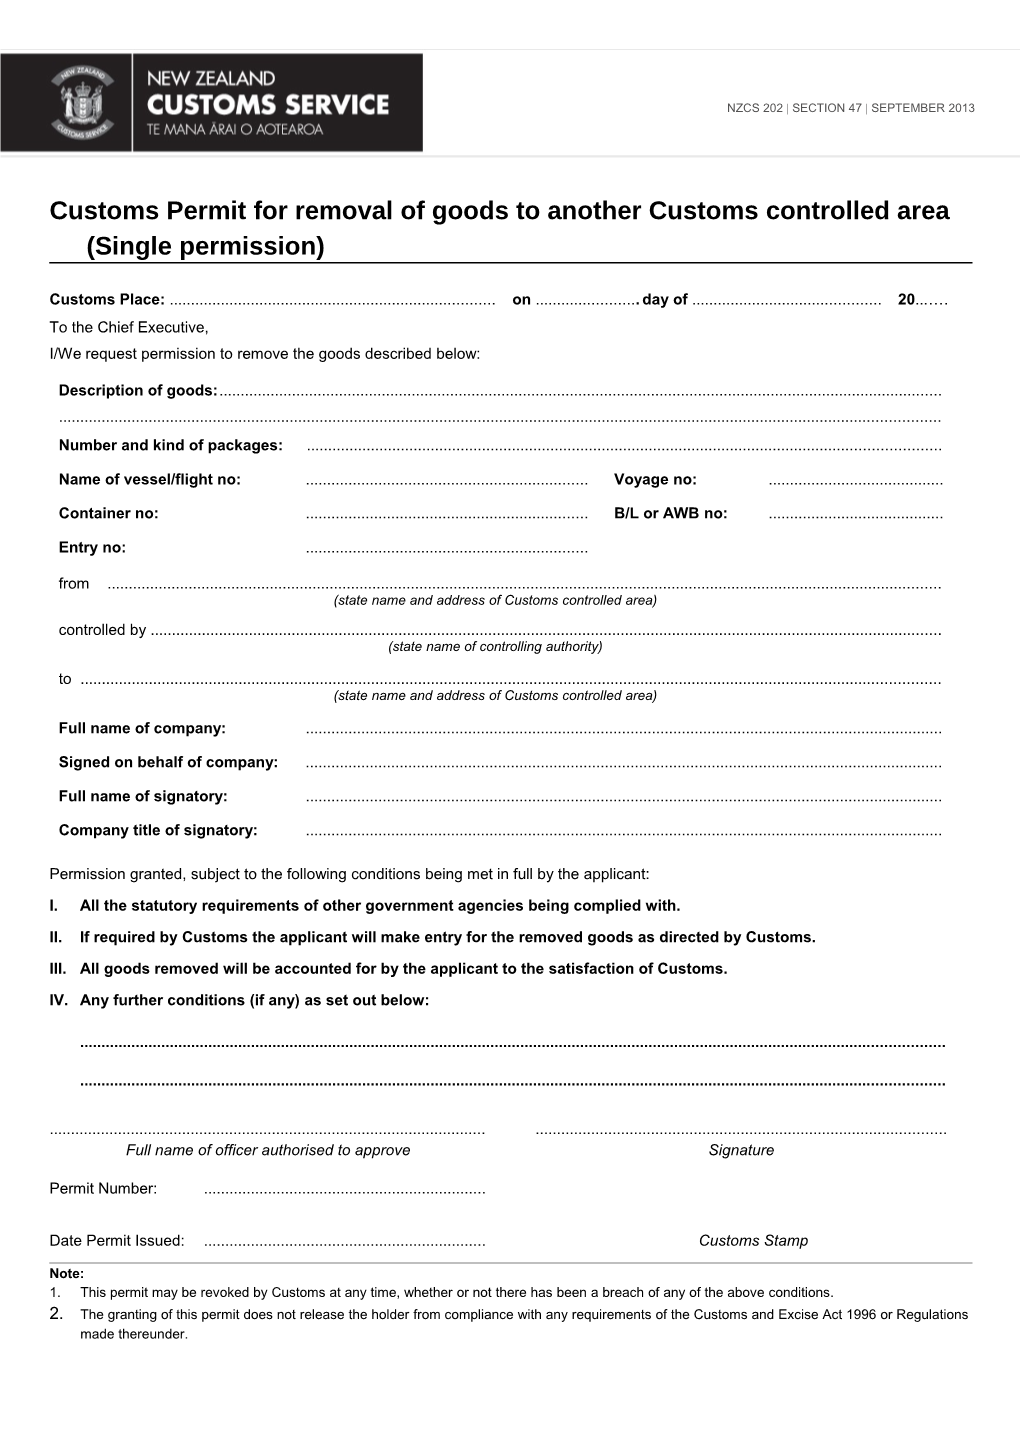 NZCS 202 - Customs Permit for Removal of Goods to Another Customs Controlled Area (Single